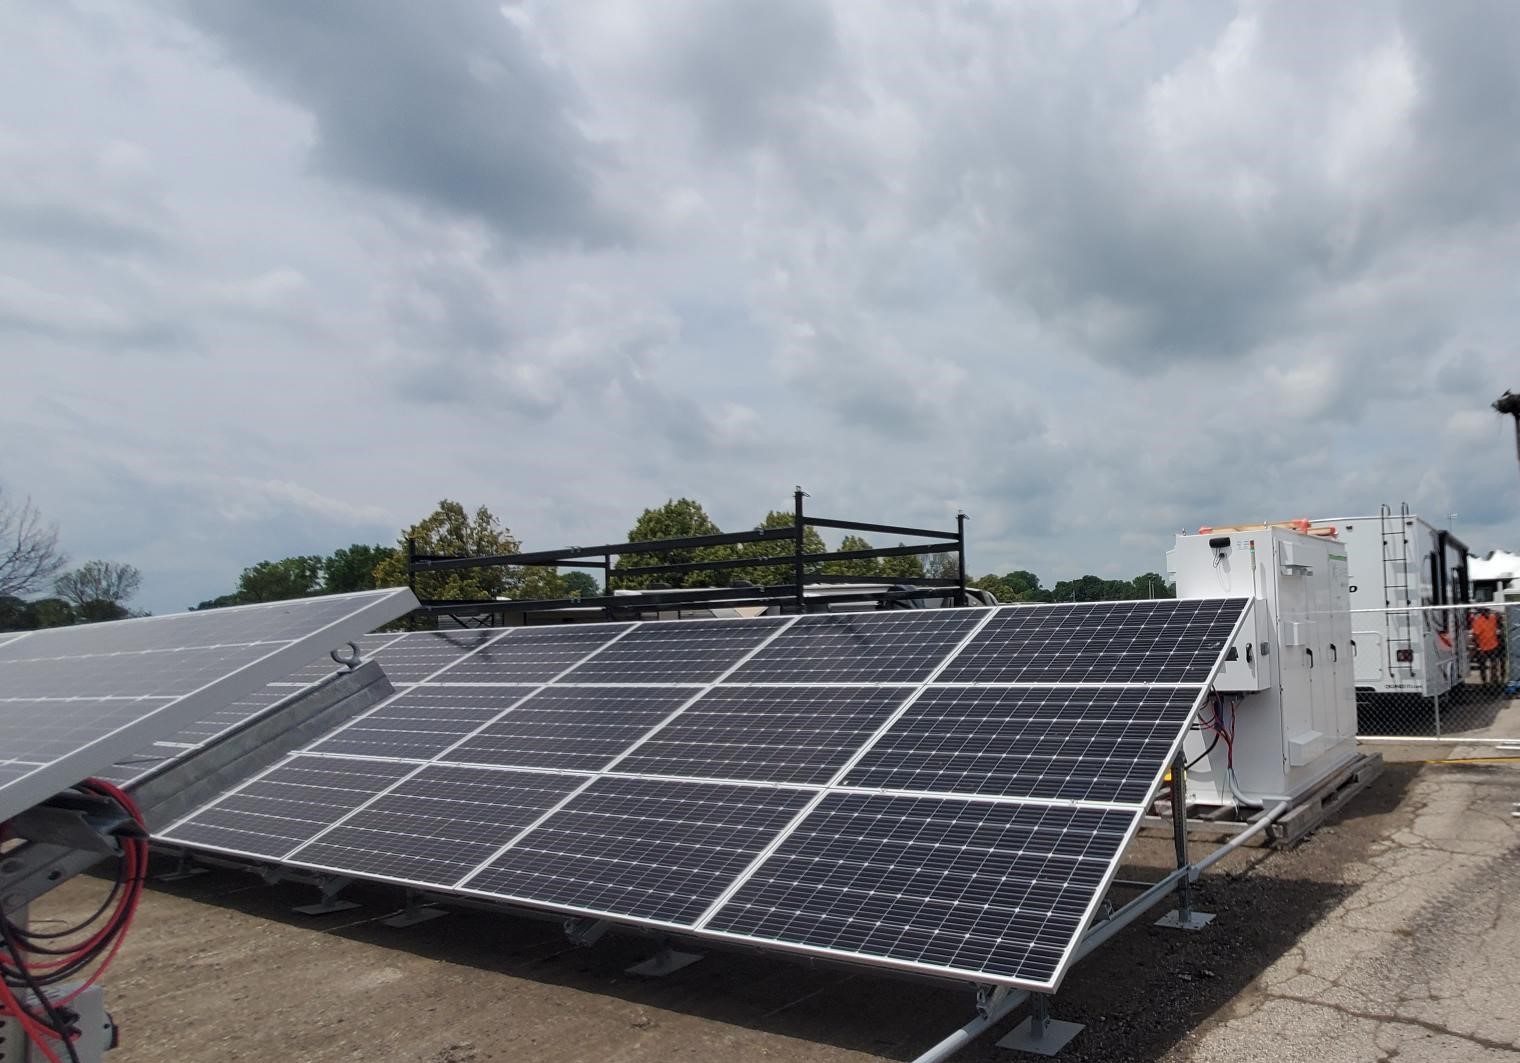 installing temporary grid-connected microgrid power for lifest event